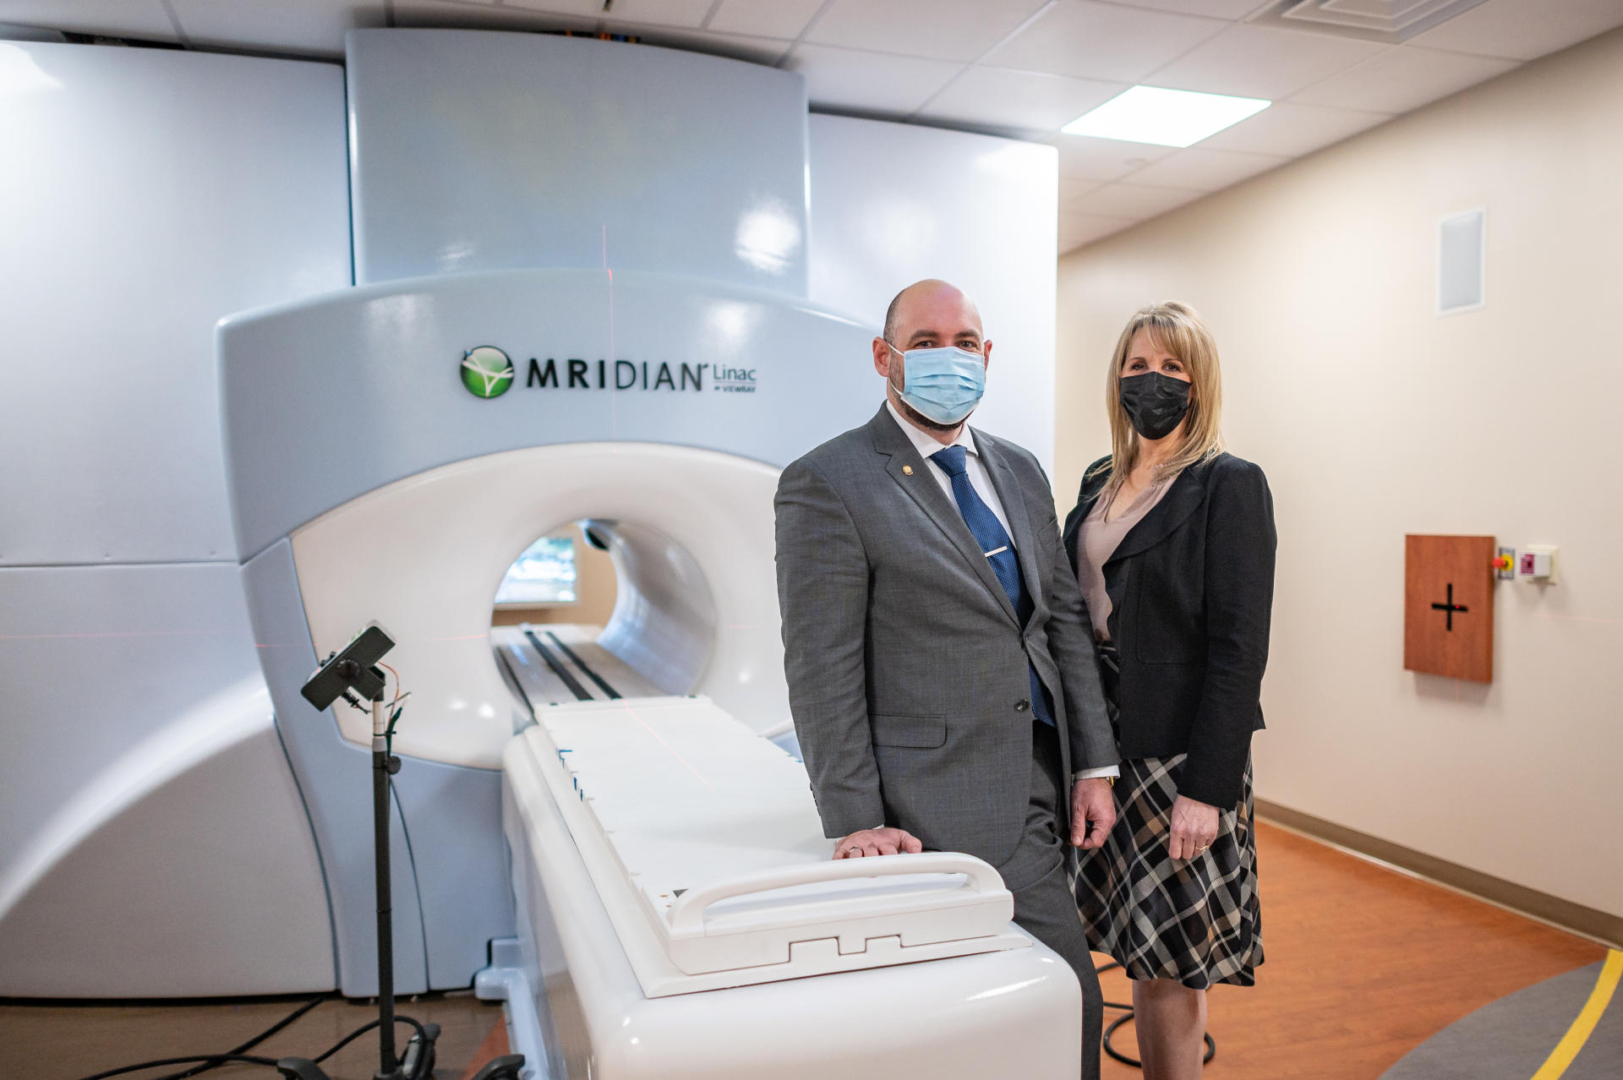 Two people pose in a room with an MRI machine.